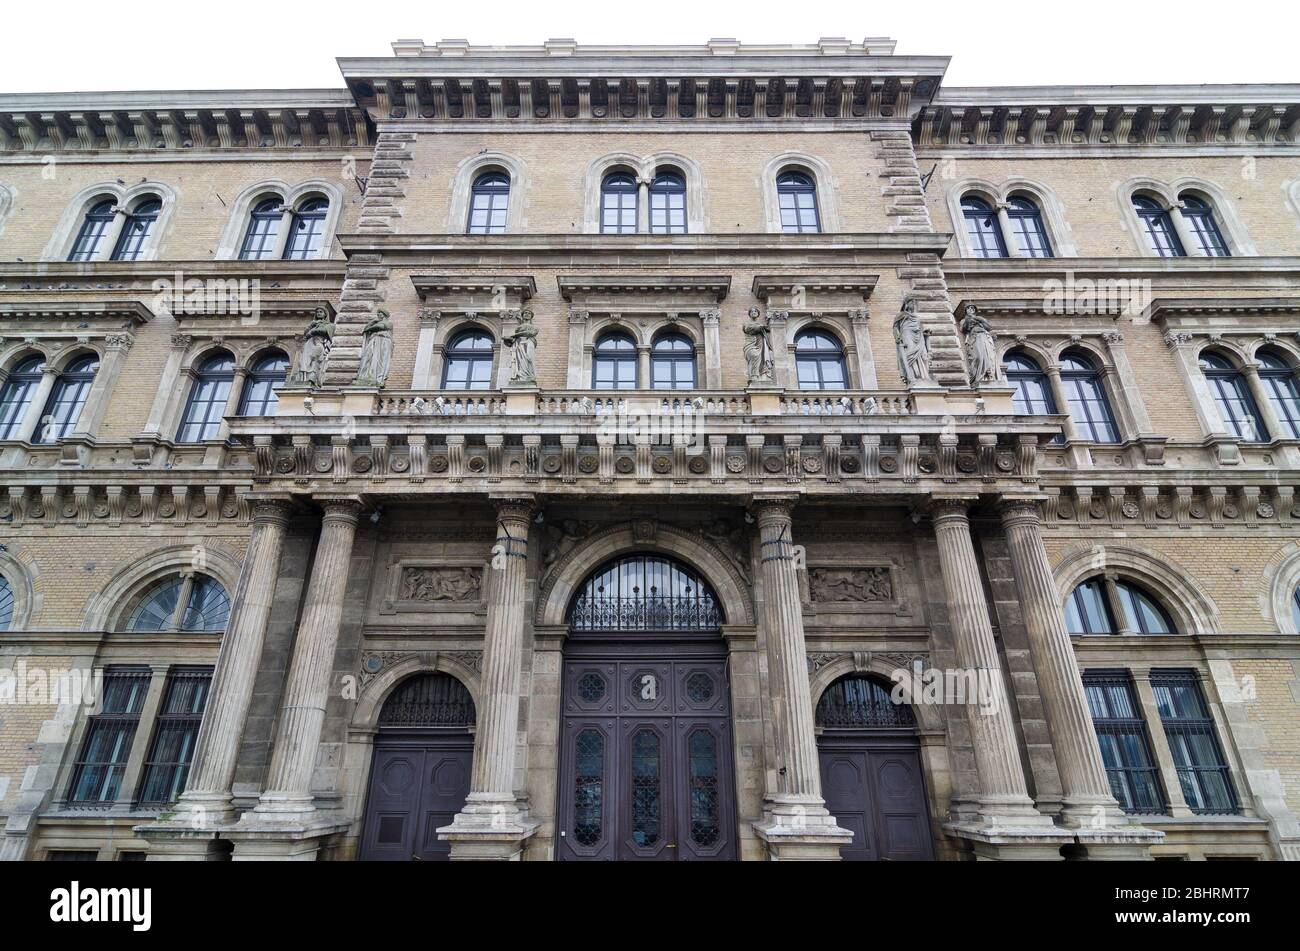 BUDAPEST, HUNGARY - FEBRUARY 21, 2016: Main building of the Corvinus University of Budapest. Part of the UNESCO Heritage Site. Built in neo-renaissanc Stock Photo